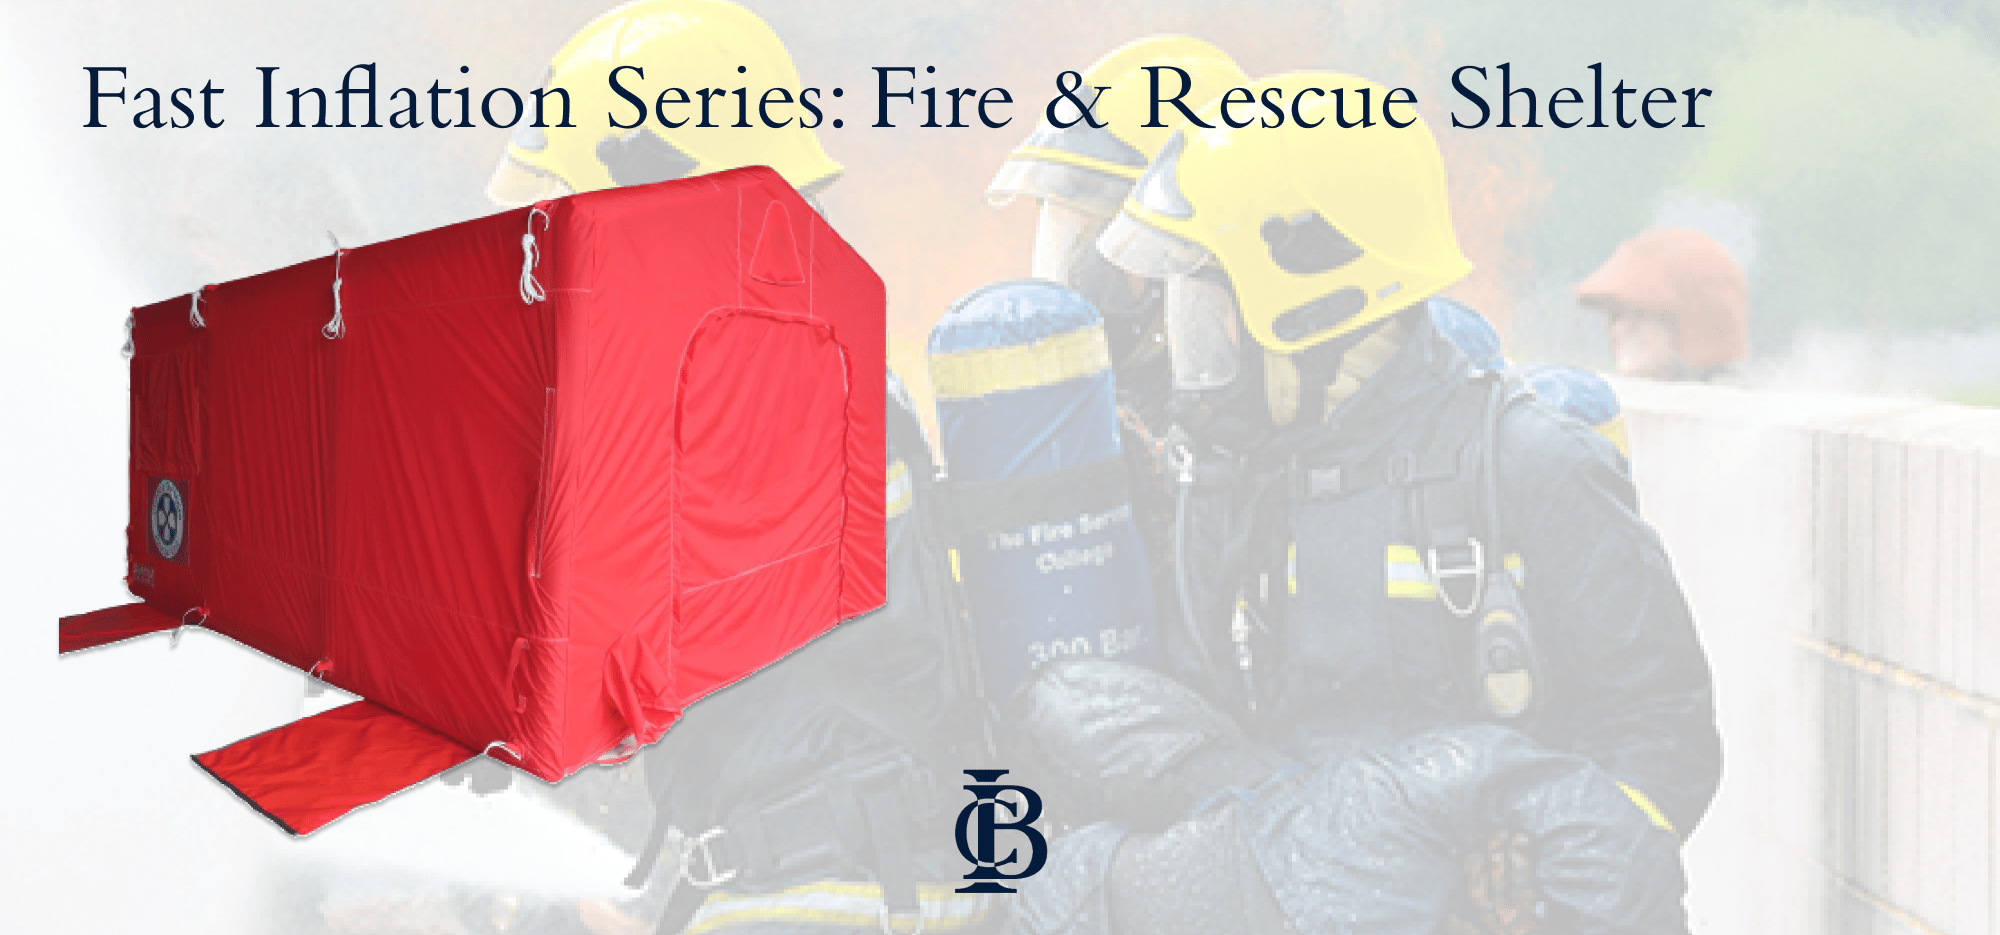 Fast Inflation Series: Fire & Rescue Shelter